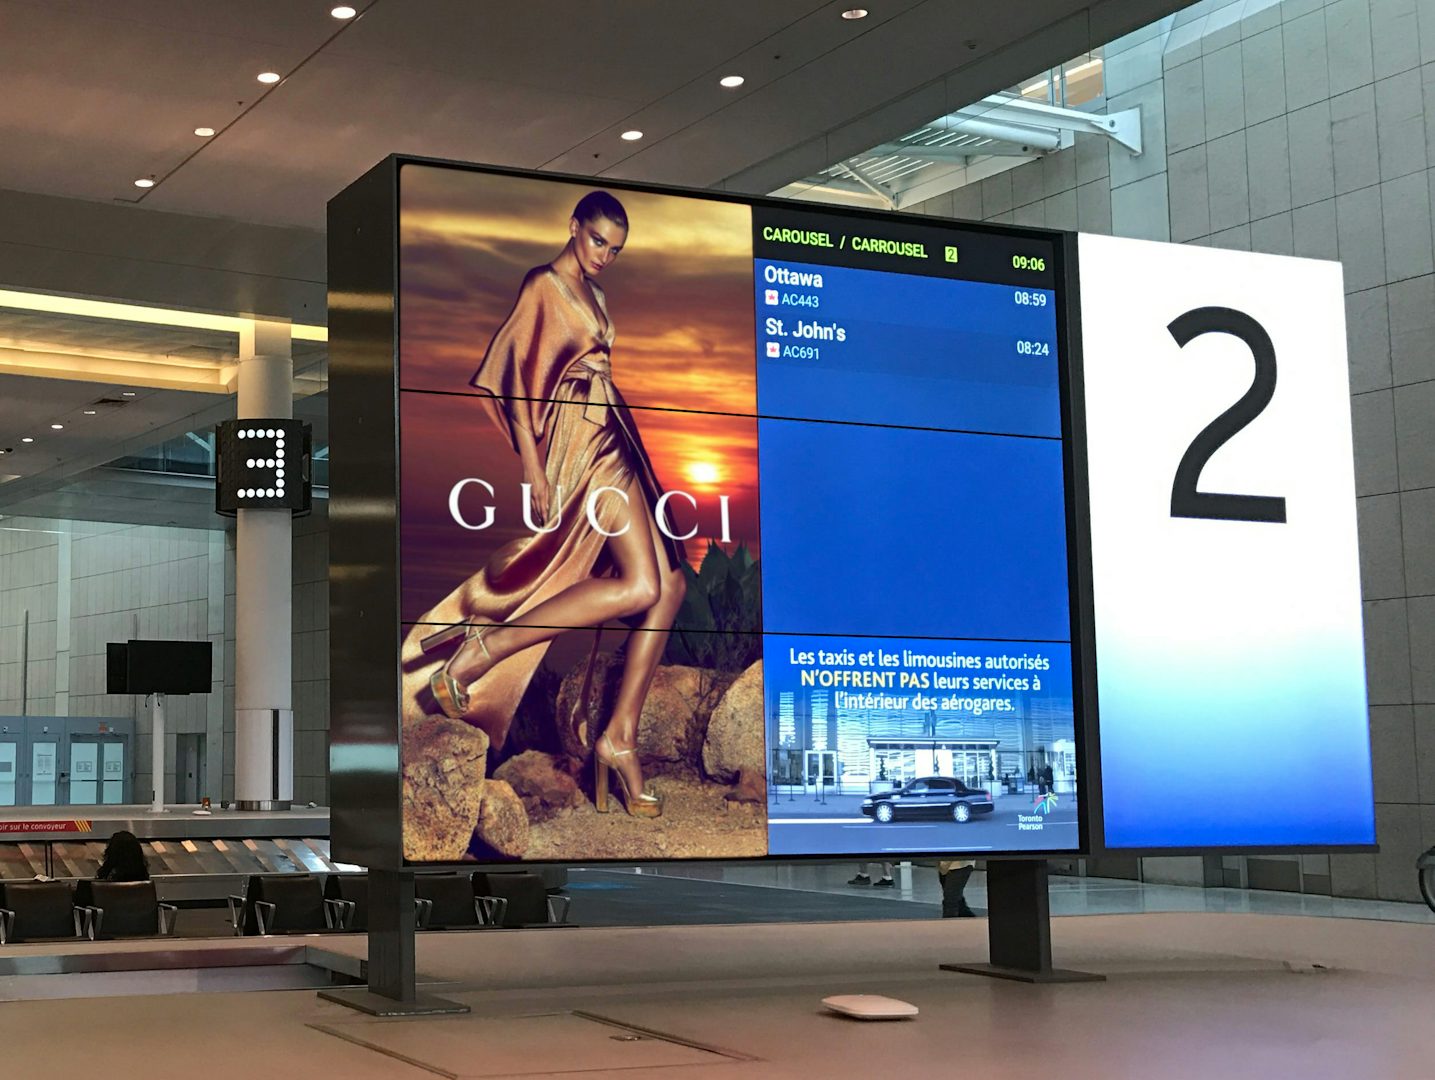 Astral digital board featuring a Gucci ad and flight arrivals at a baggage carousel